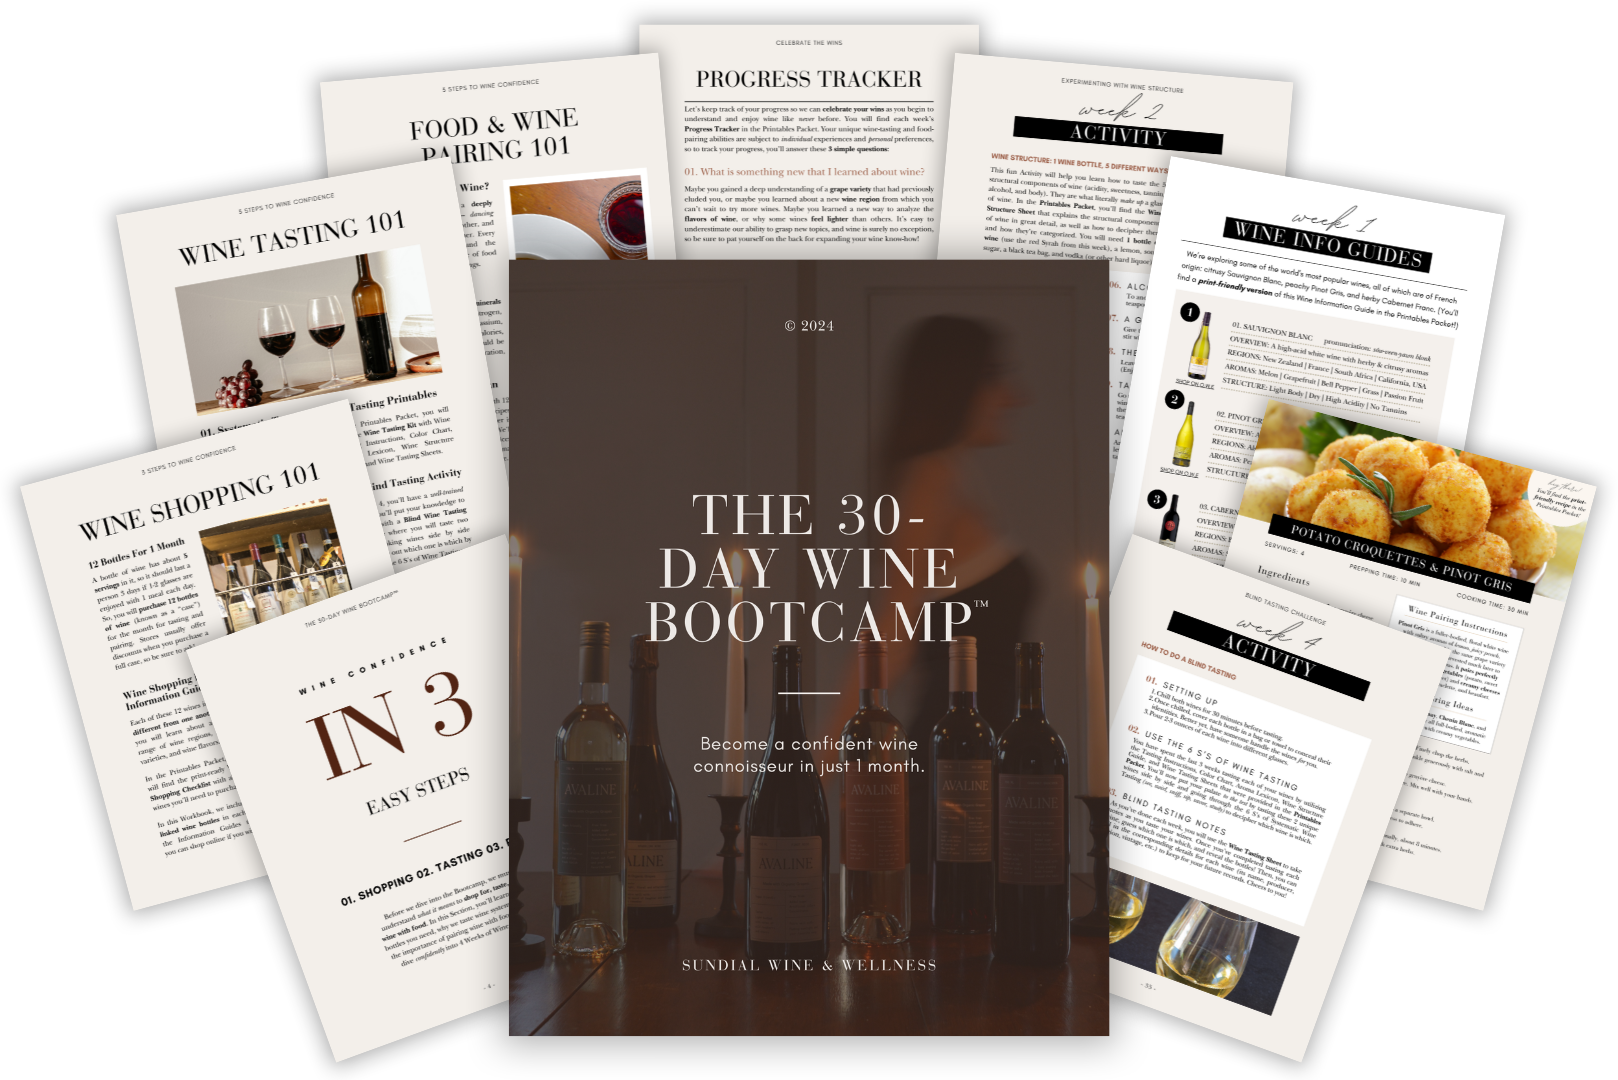 The 30-Day Wine Bootcamp